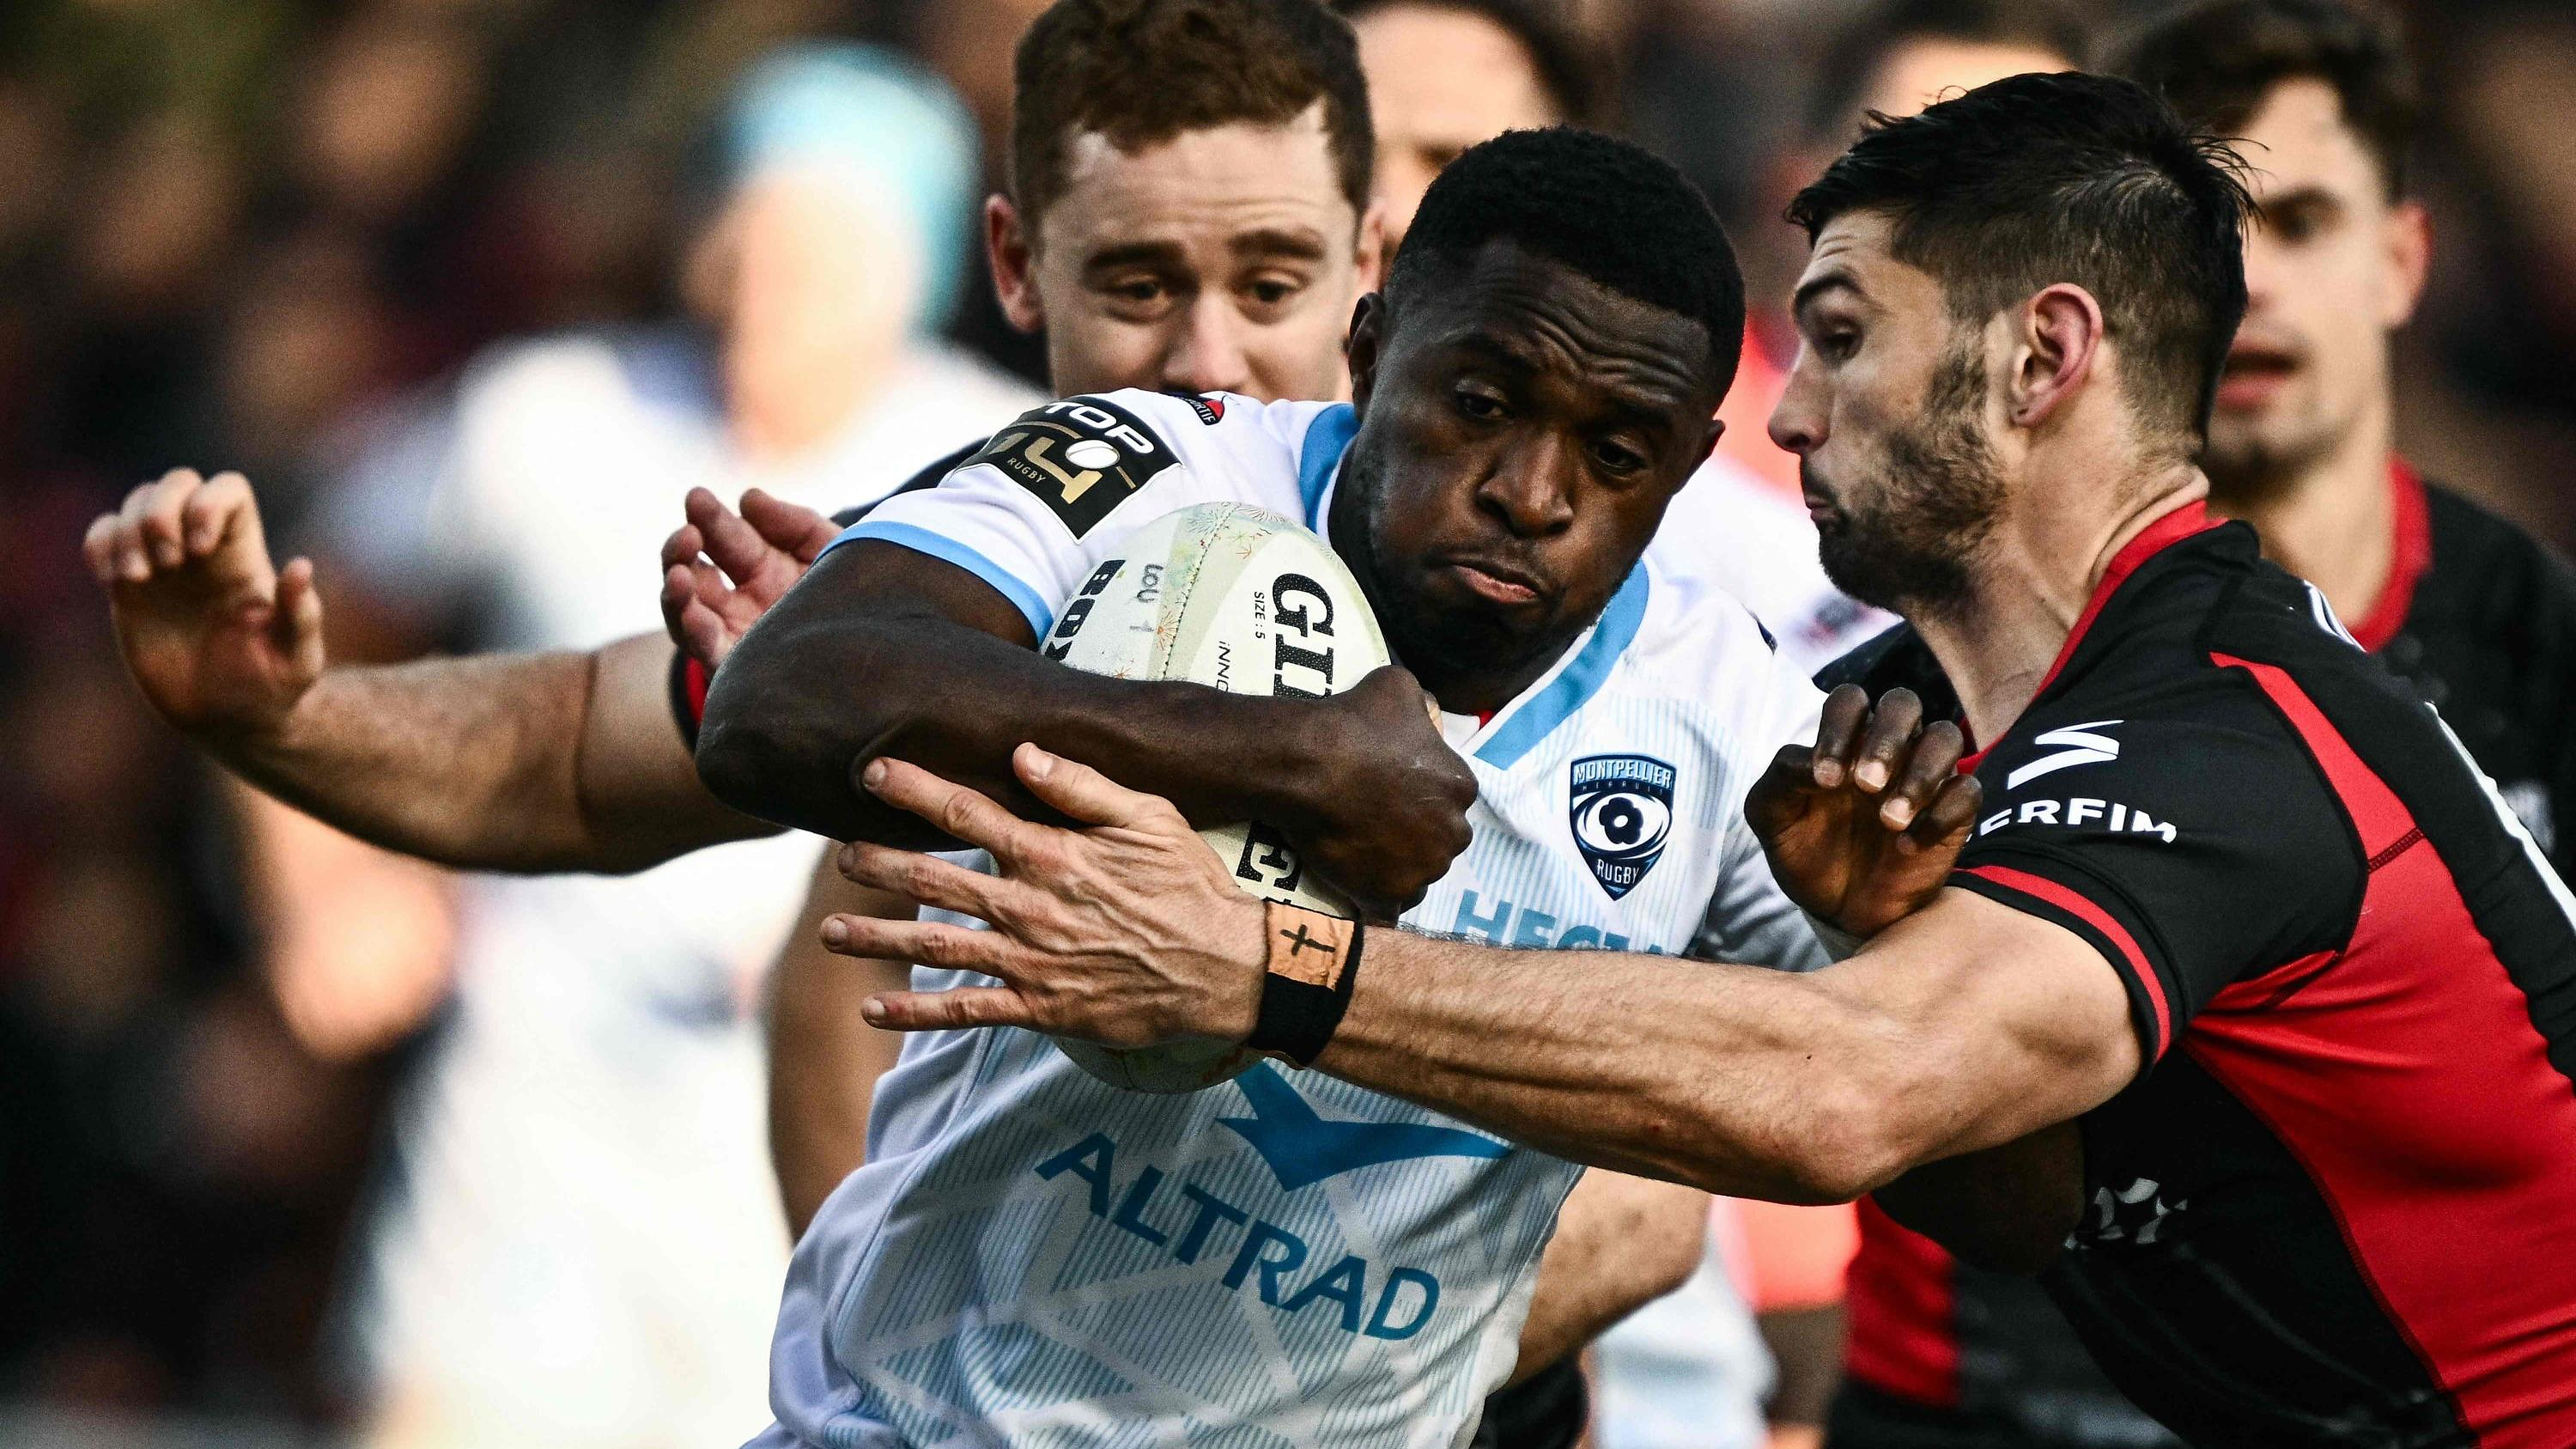 Top 14: “It’s not at all the same sport”, Montpellier knows what awaits it for maintenance